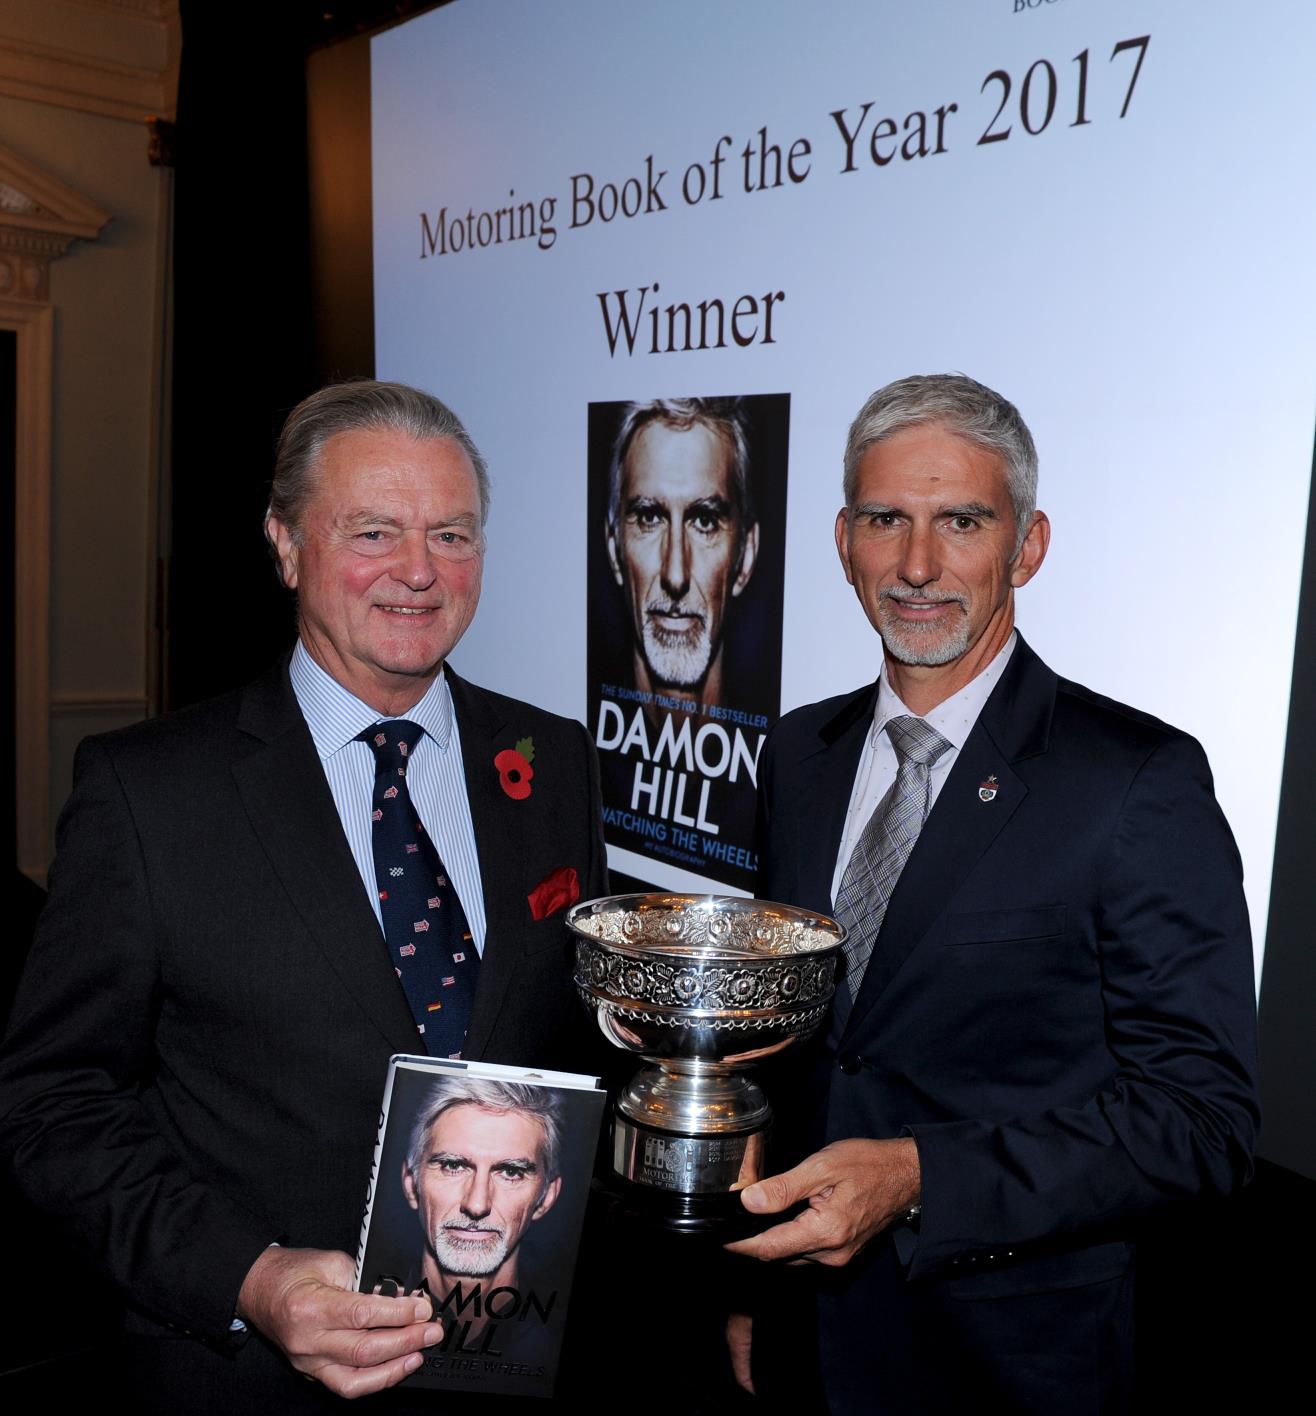 Damon Hill’s Life Story Wins Royal Automobile Club Motoring Book of the Year 2017